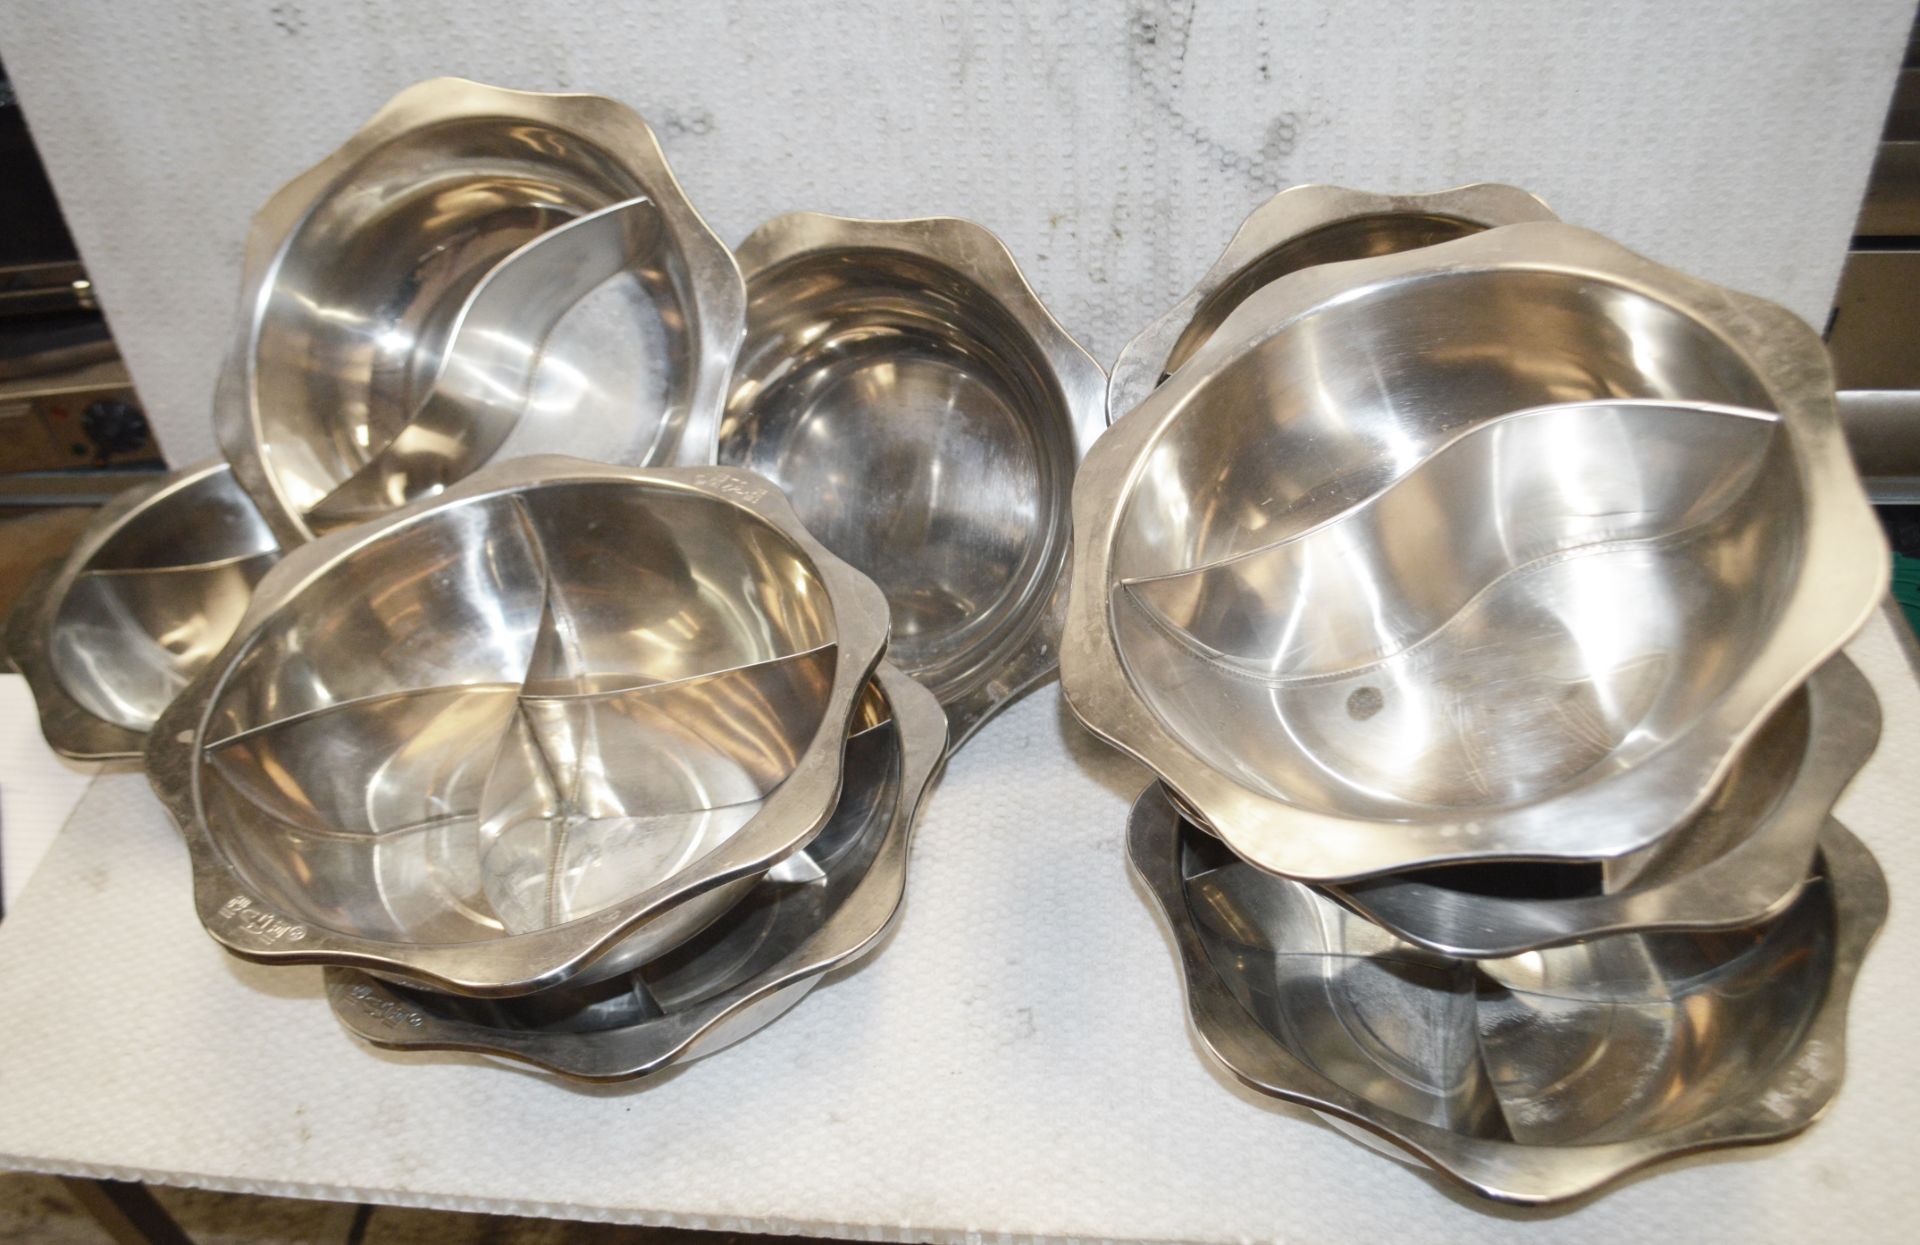 8 x Stainless Steel Buffet Serving Bowls- Dimensions: L37 x W37 x cm - Recently Removed From a - Image 3 of 4